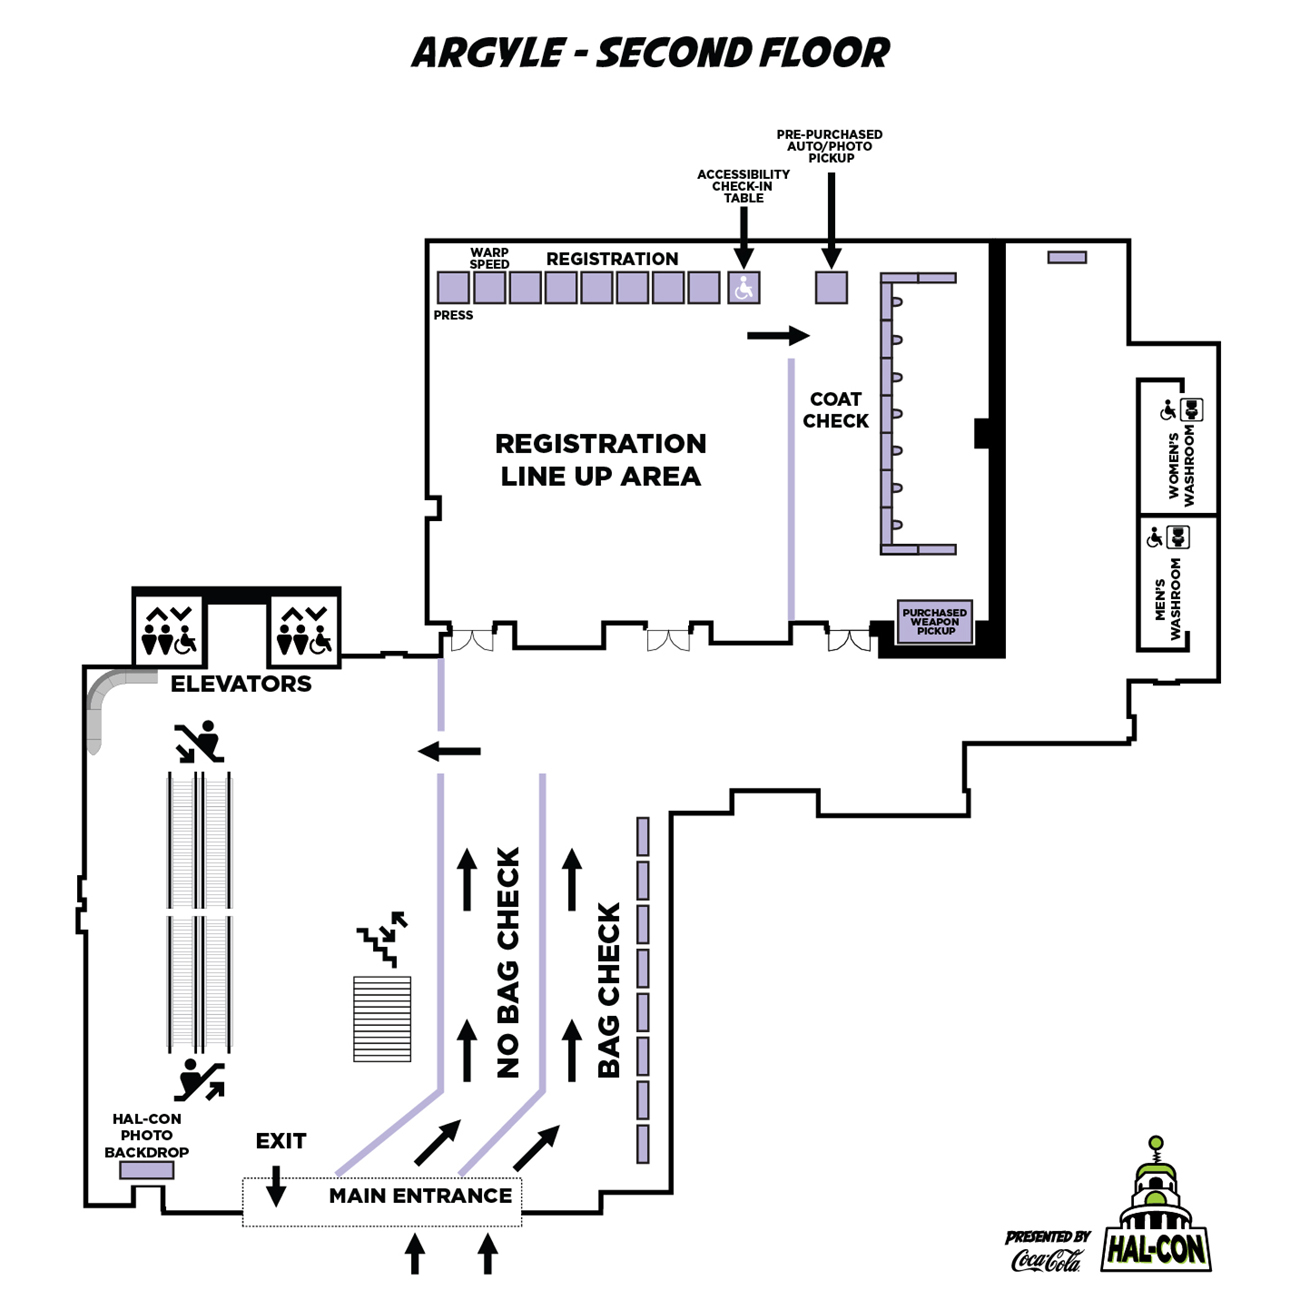 Map of the Second Floor